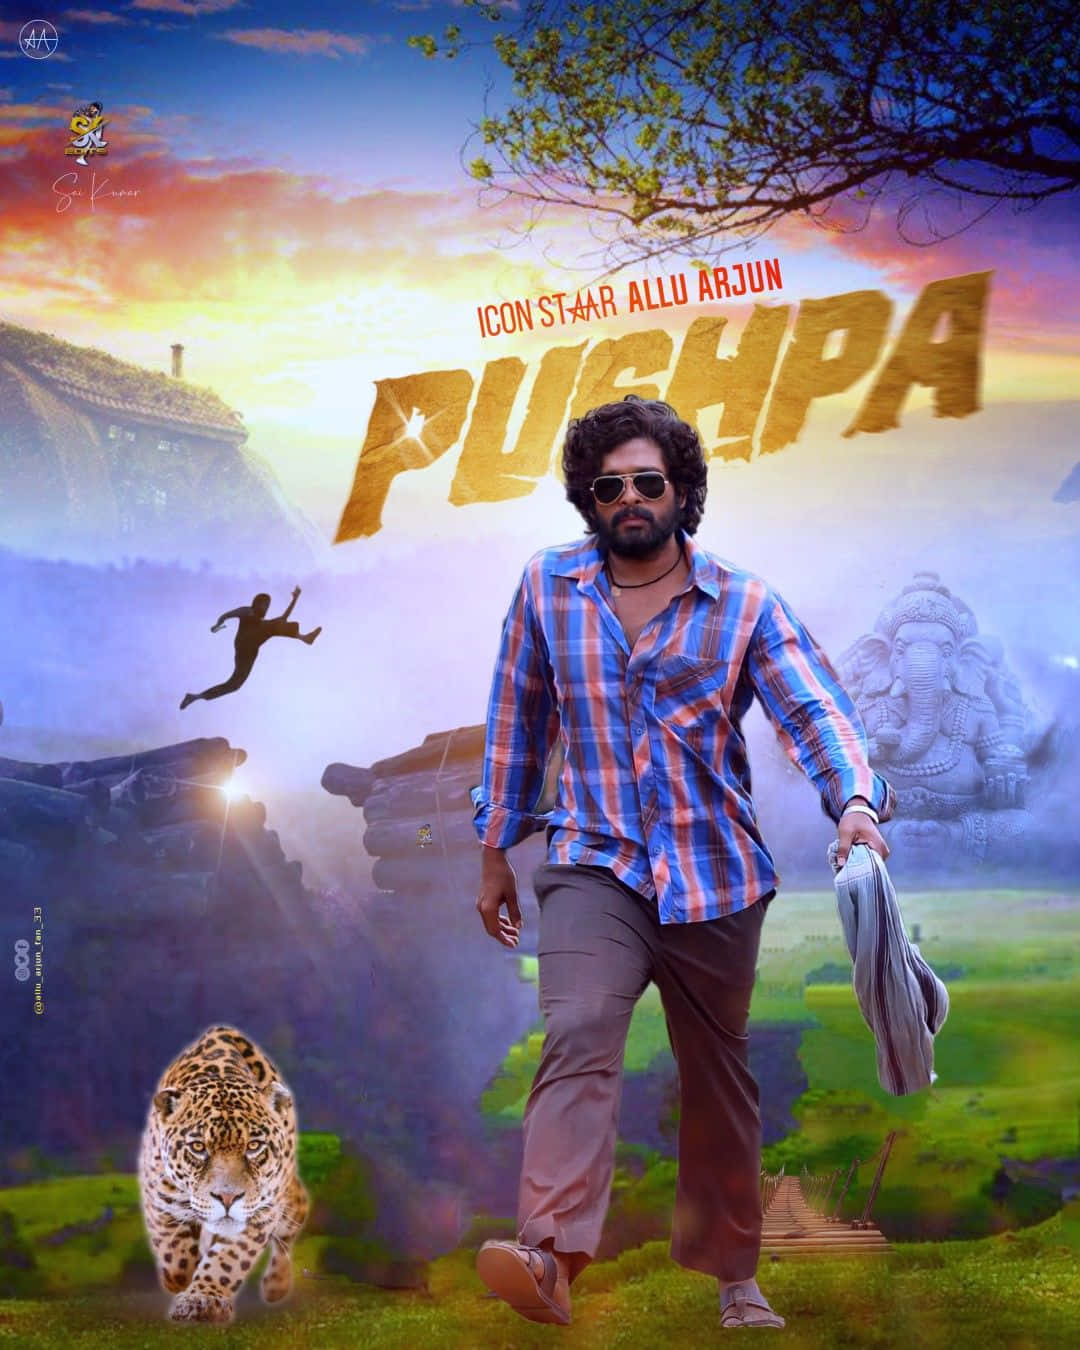 A Poster For The Movie Puhpa